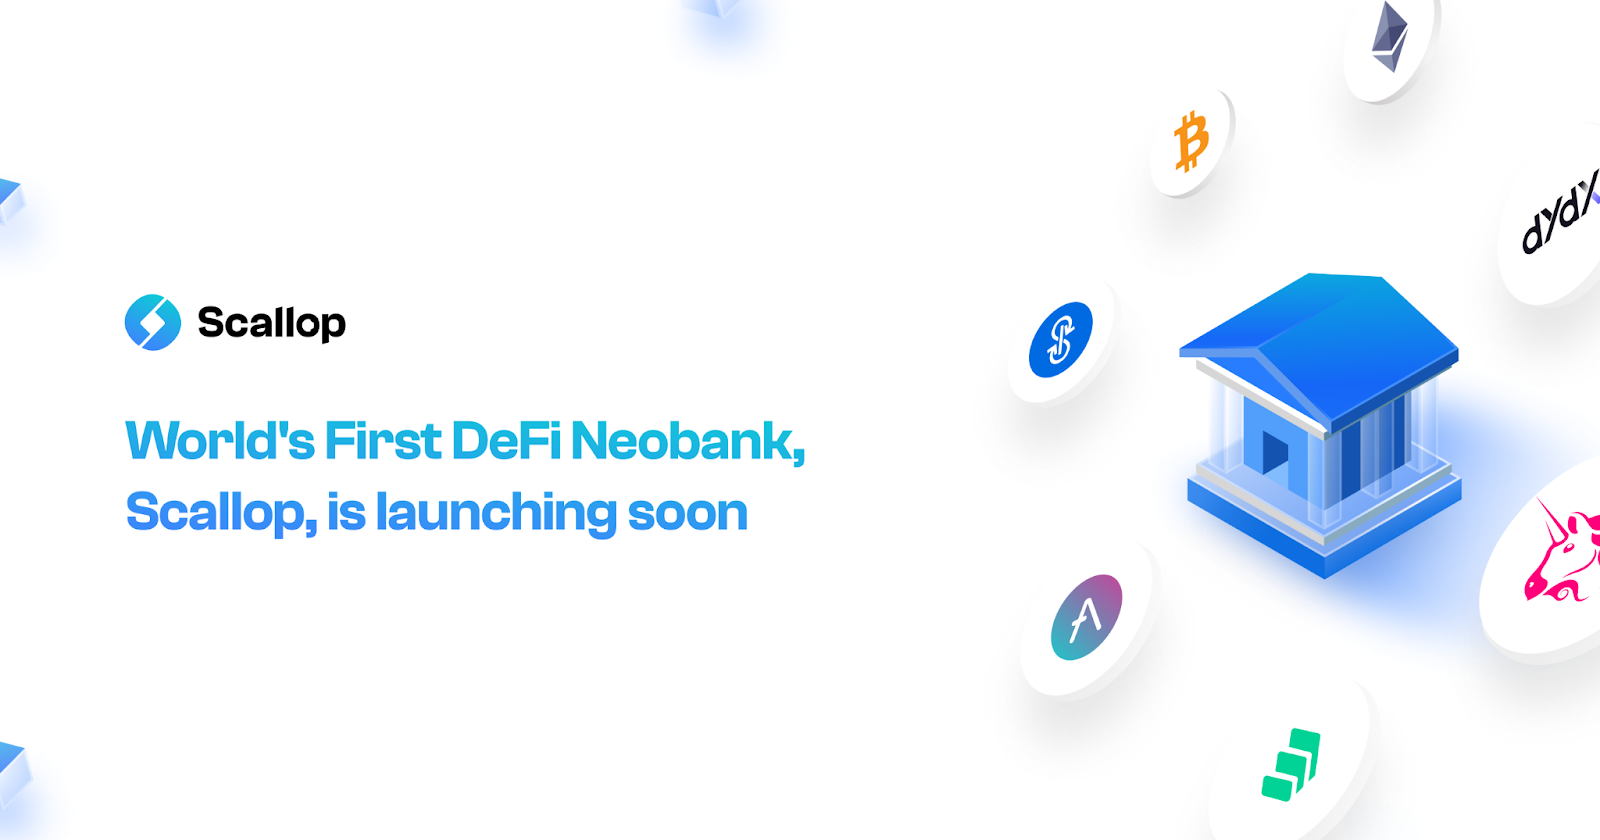 World's First DeFi Neobank, Scallop, is launching soon